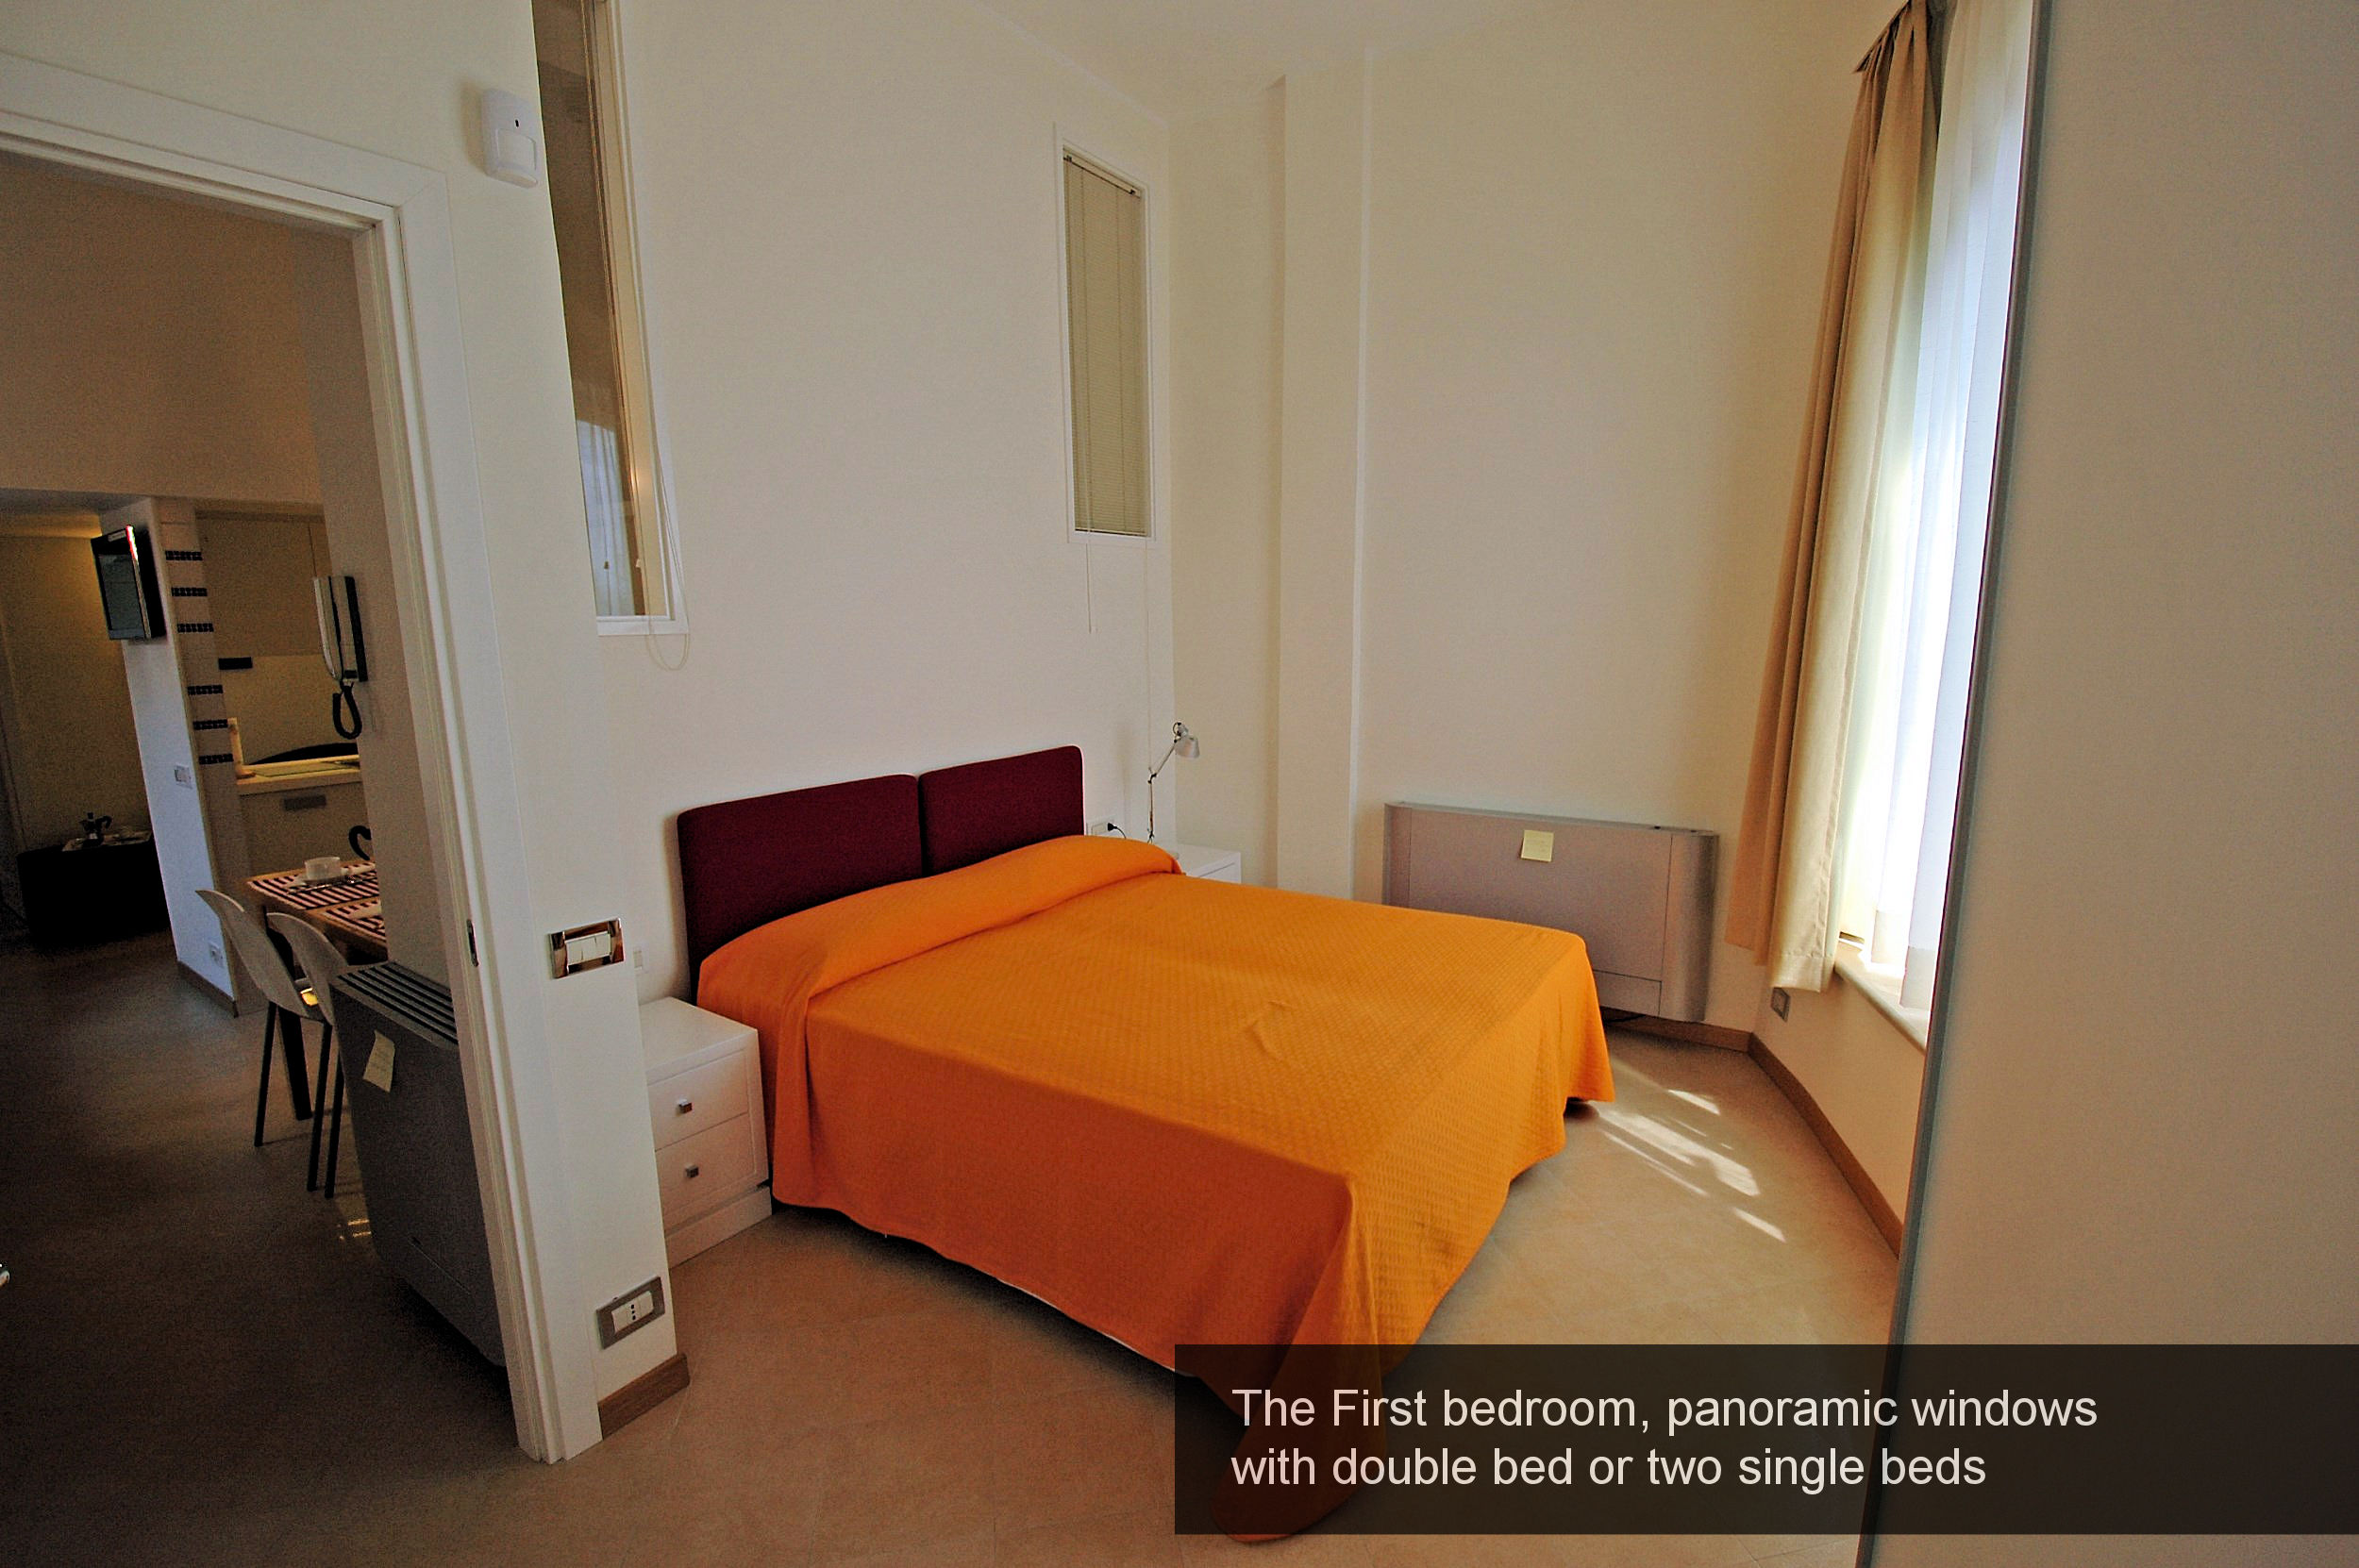 3) First bedroom, panoramic windows with double bed or two single beds